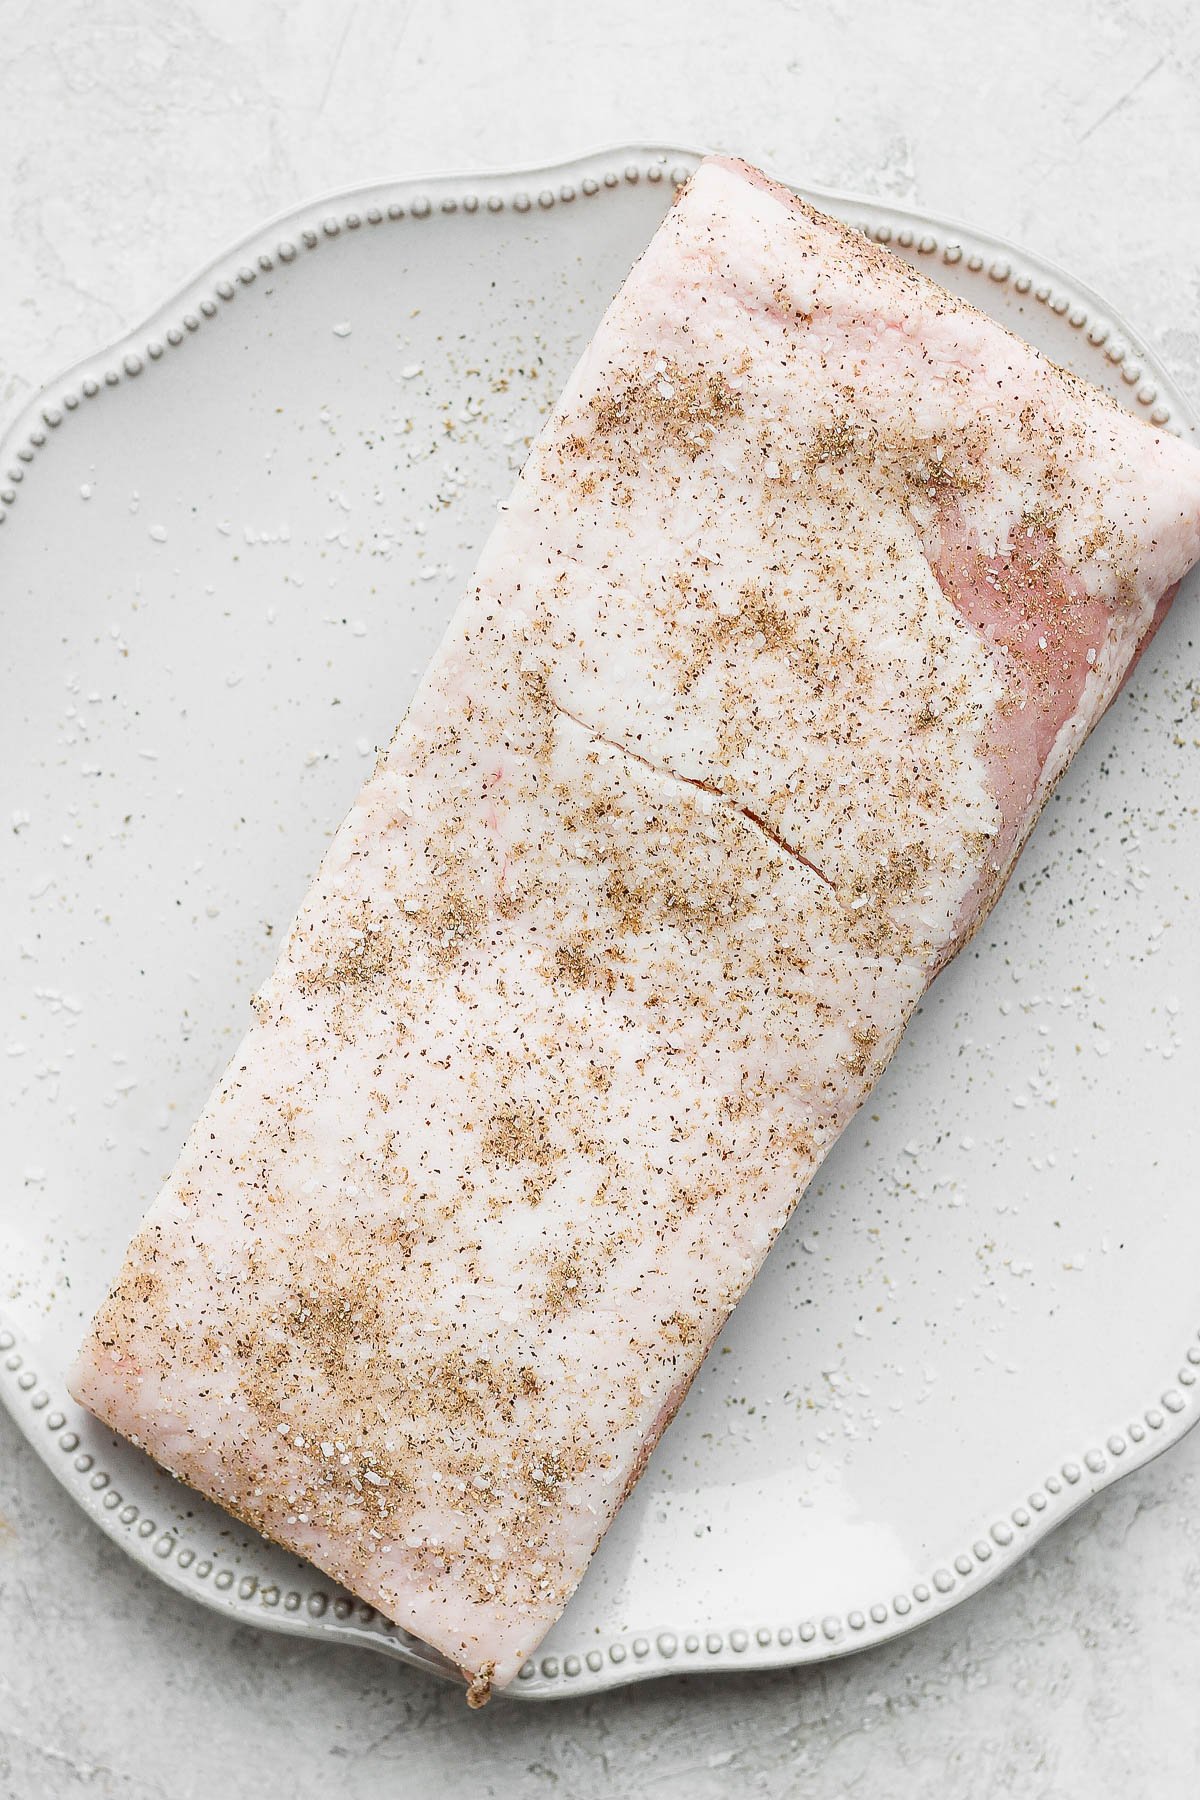 A piece of raw pork belly sitting on a plate covered in some seasoning.